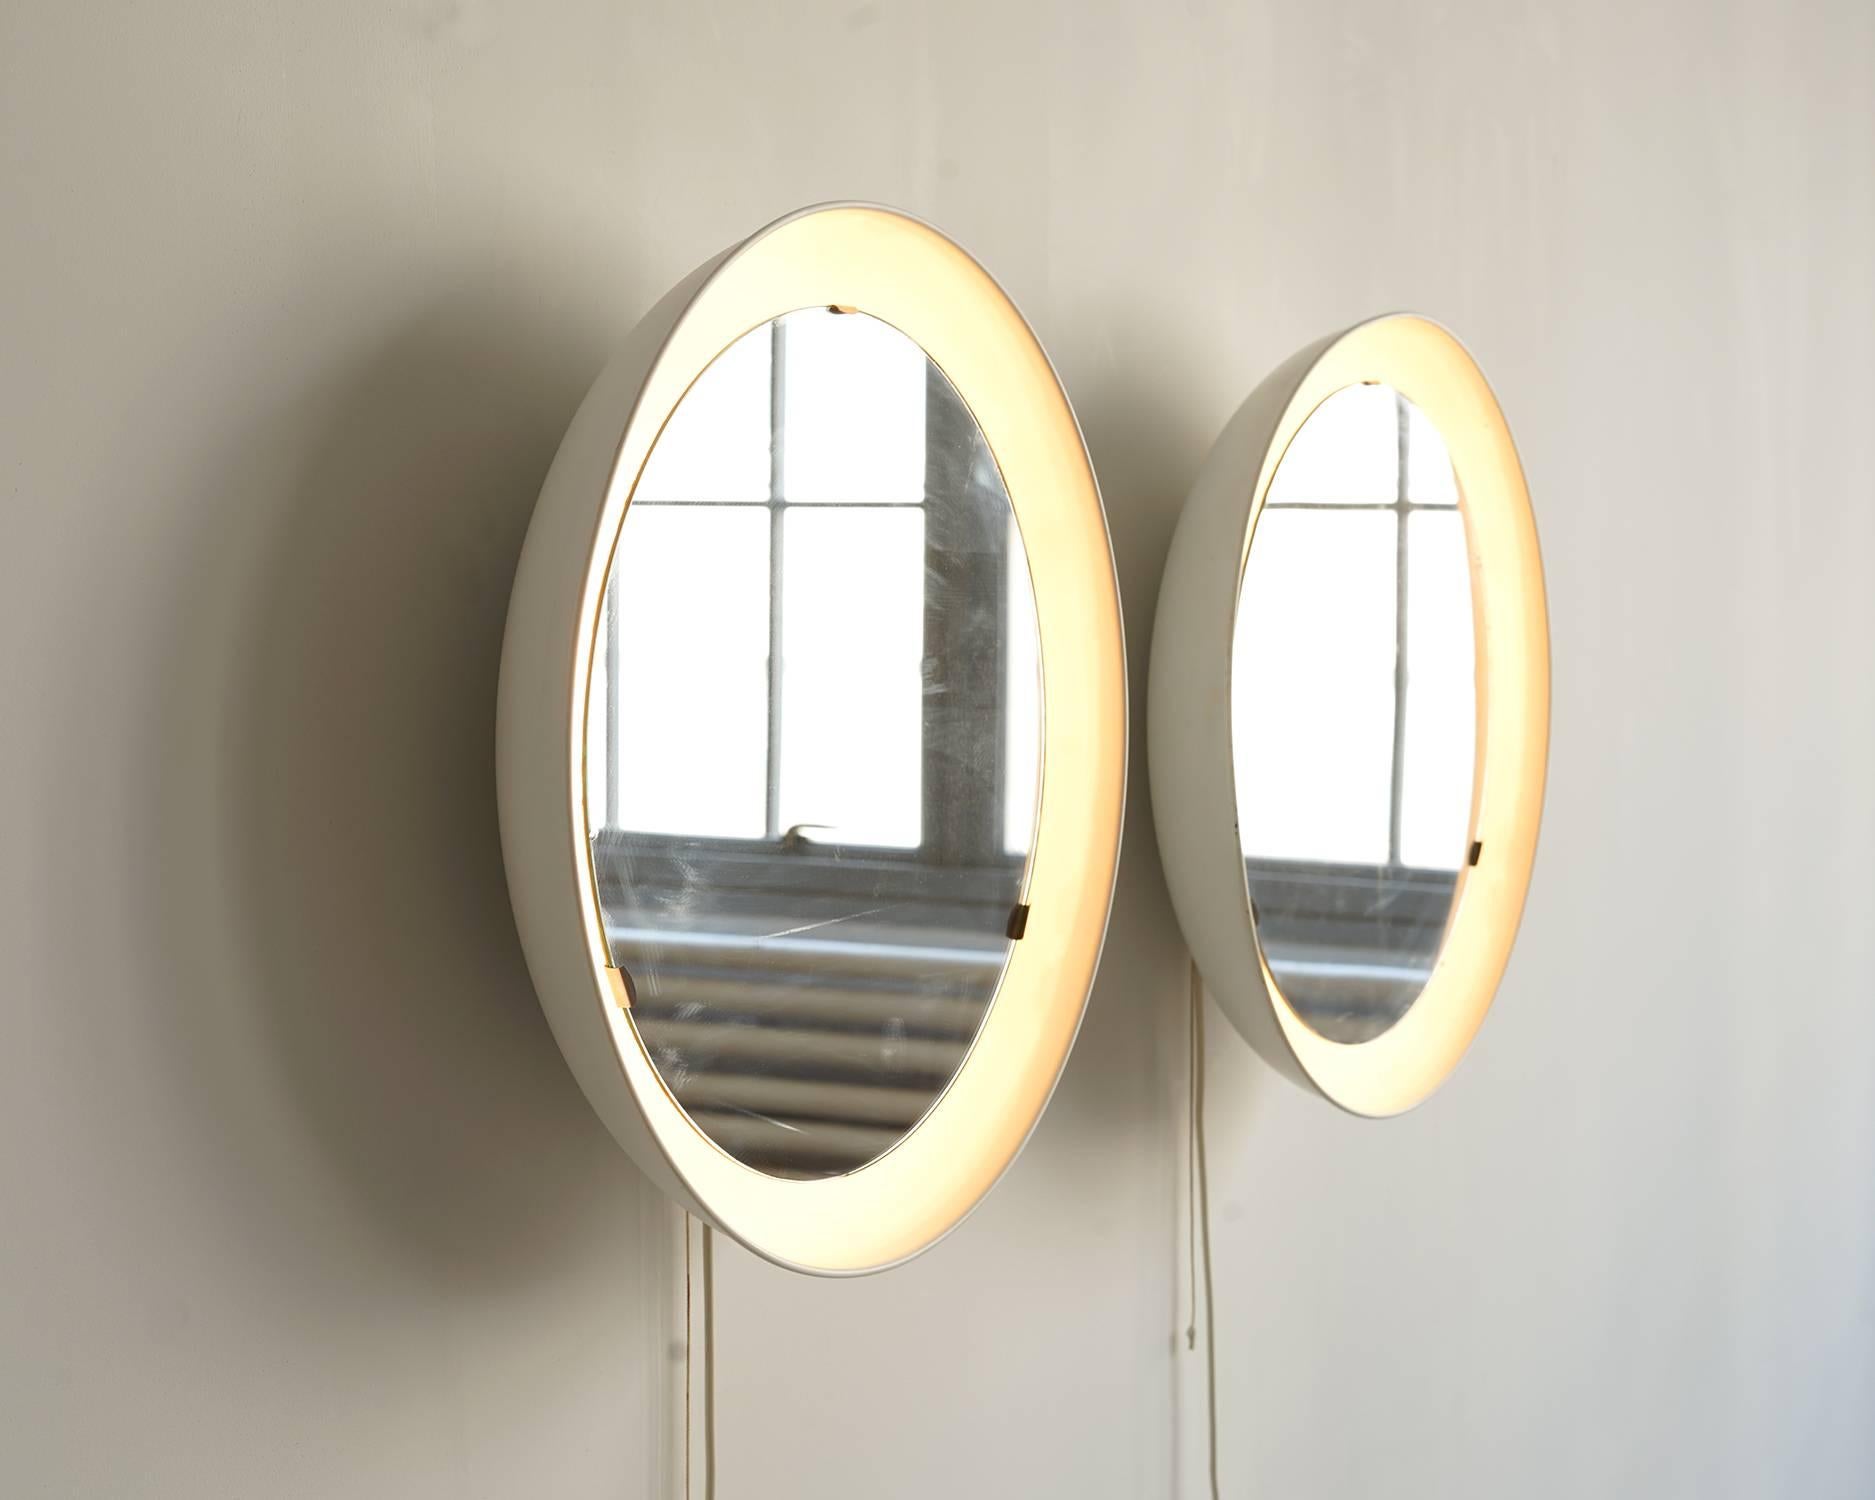 A great pair with original mirrored glass floating in white, concave, metal frames. Recessed lights behind the glass illuminate and frame your reflection in a warm glow. Original cord with plug and pull cord switch; may also be easily hard wired